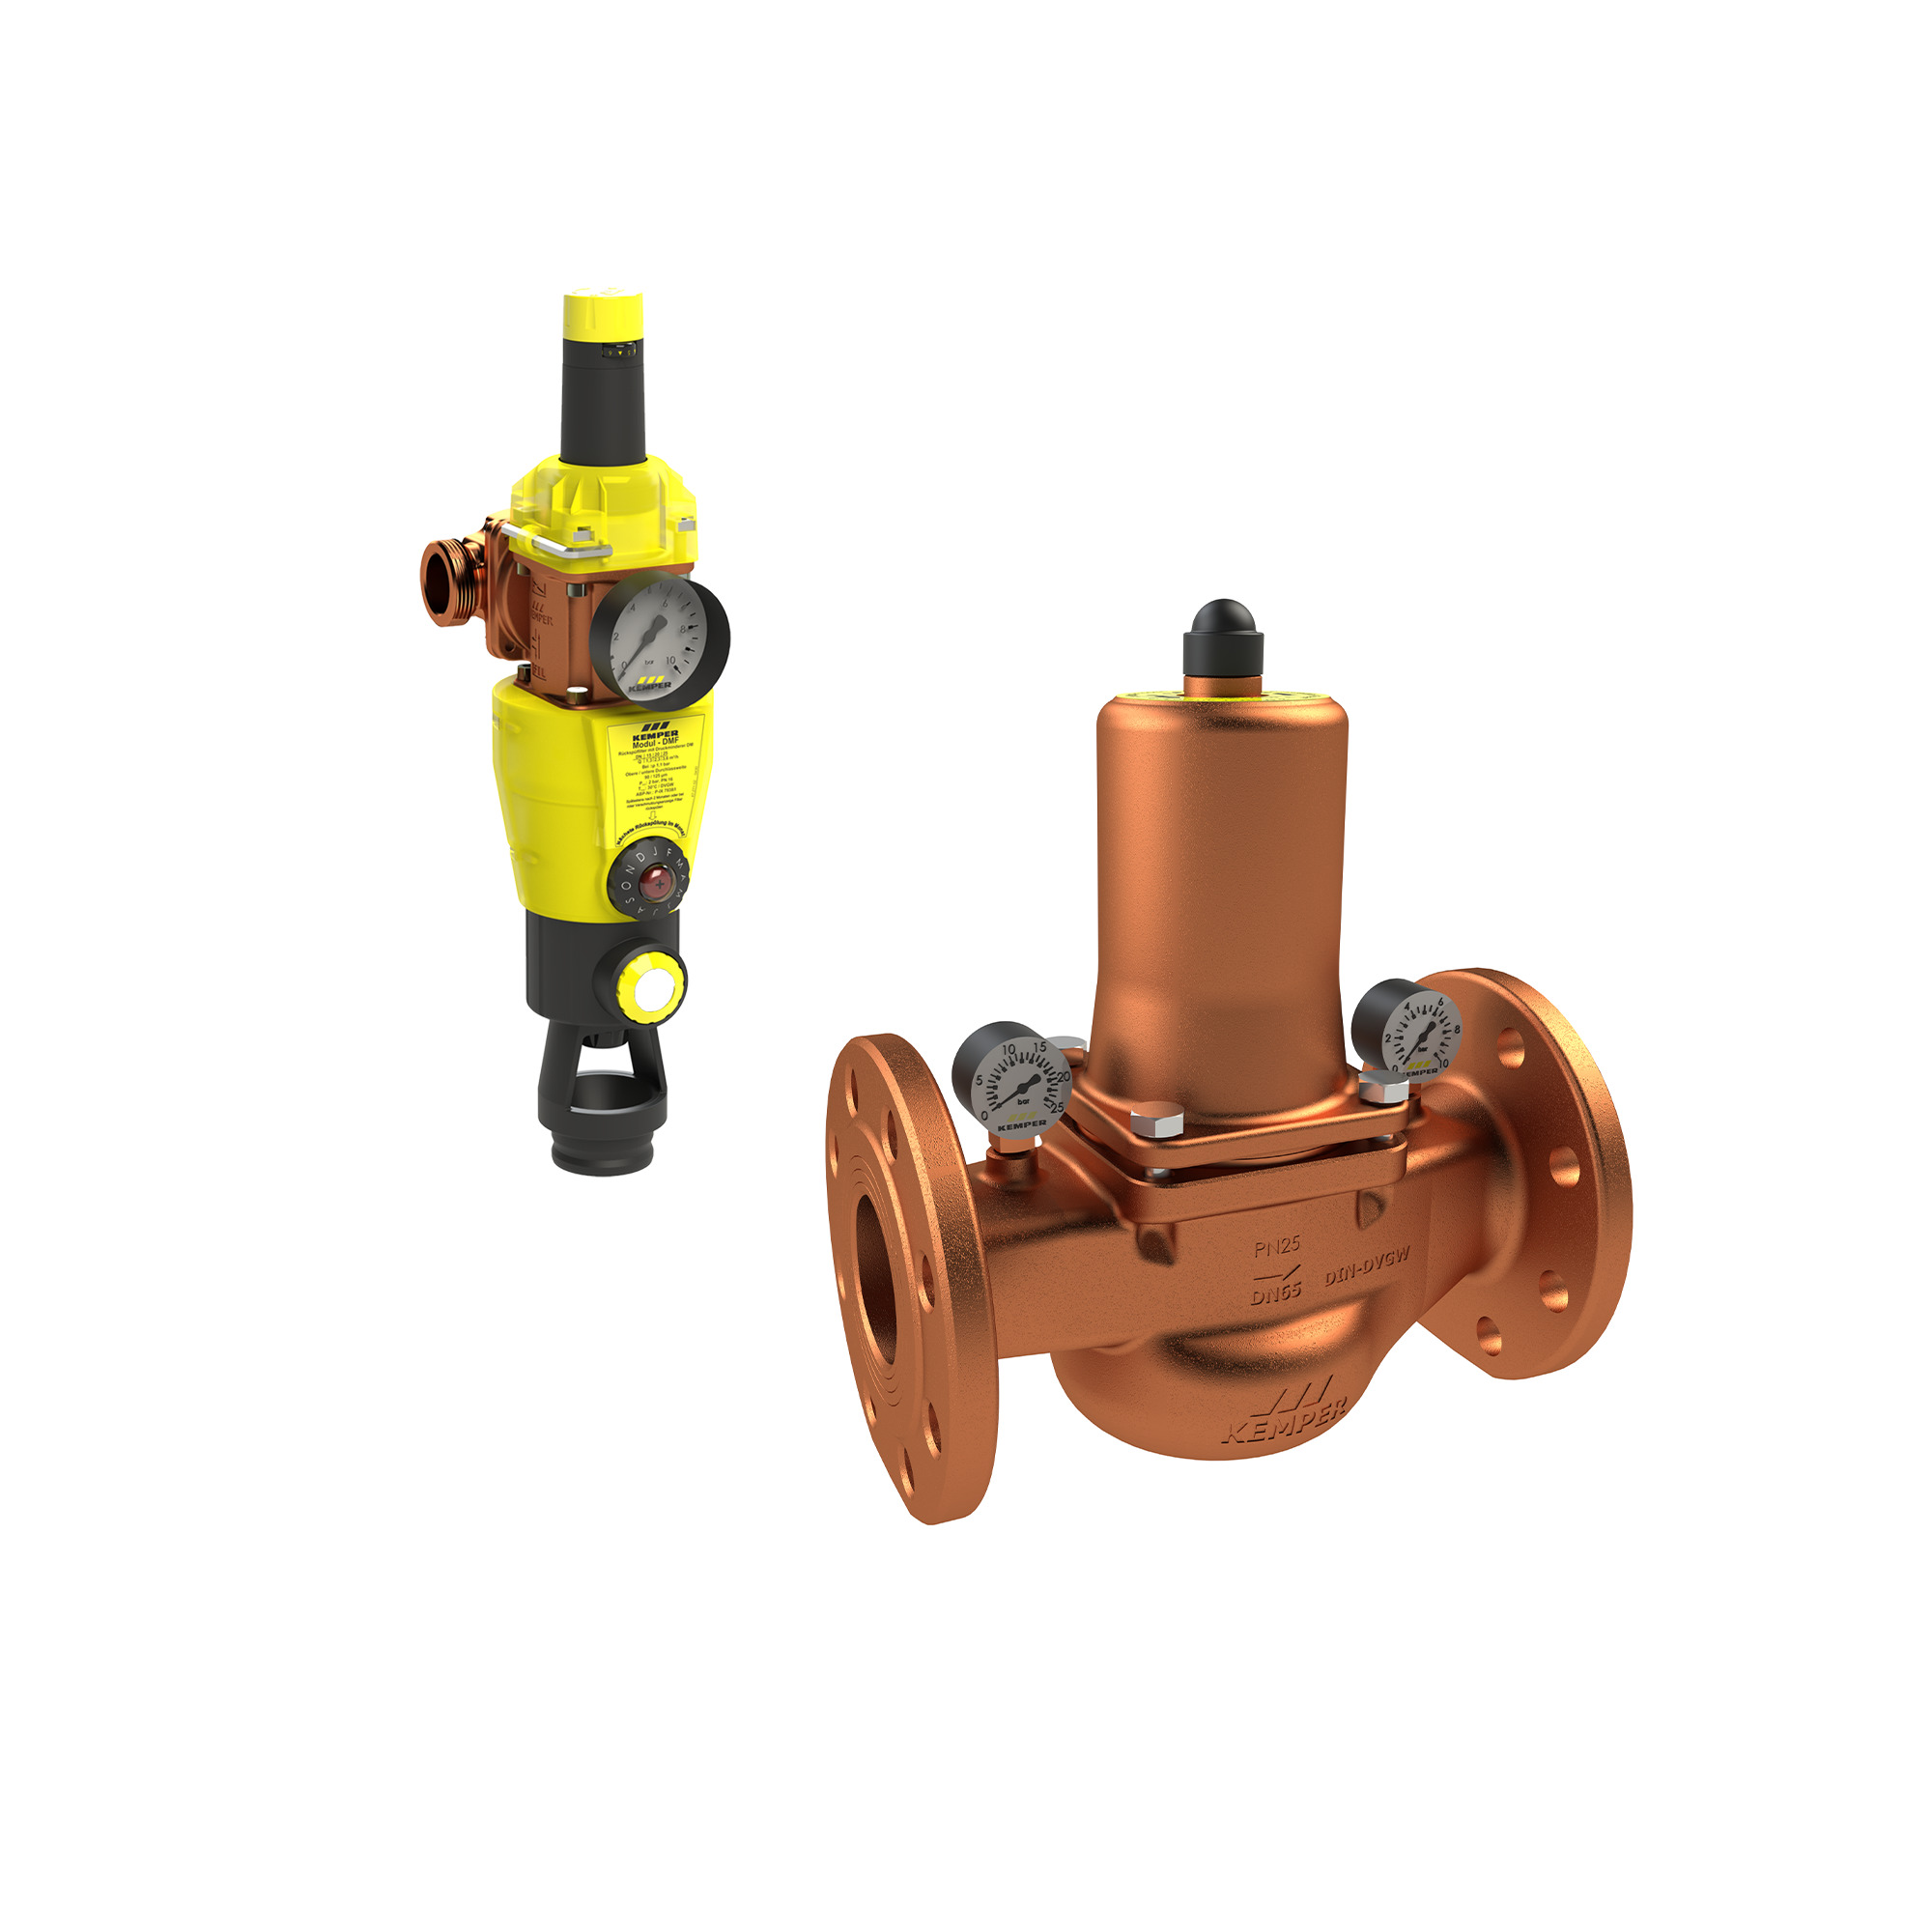 Pressure Reducing Valves and Filter